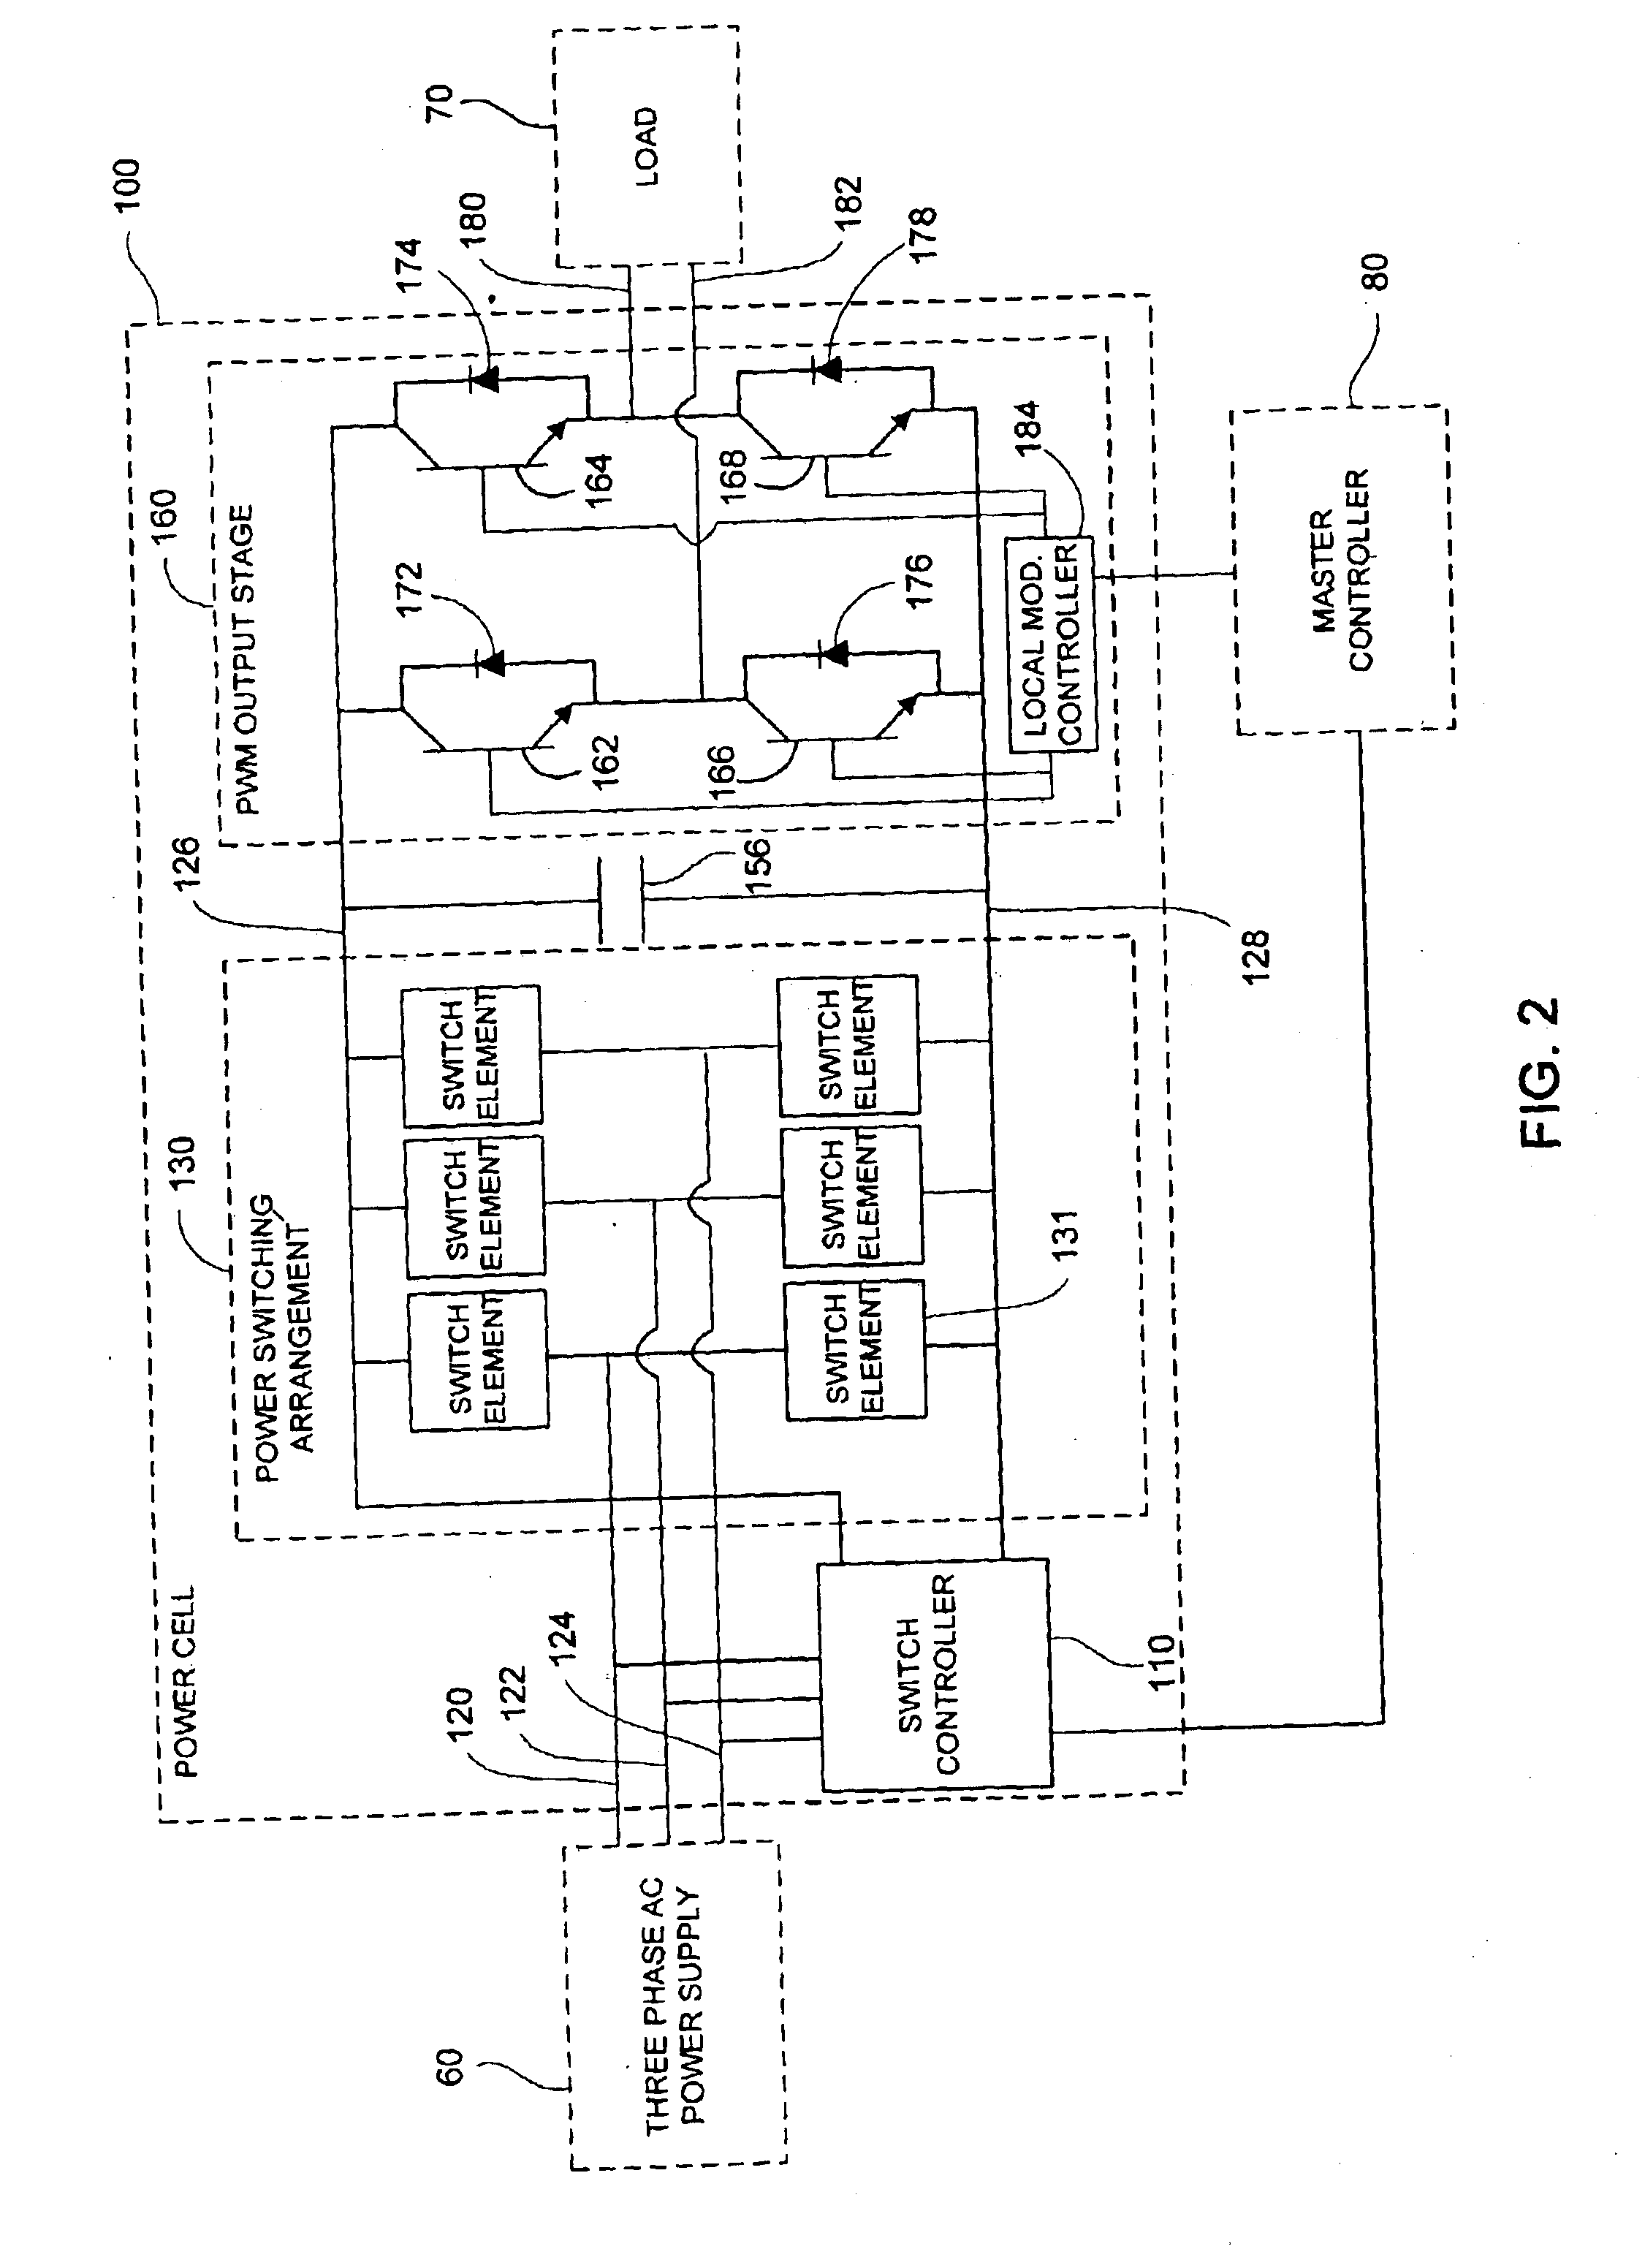 System and method for regenerative PWM AC power conversion